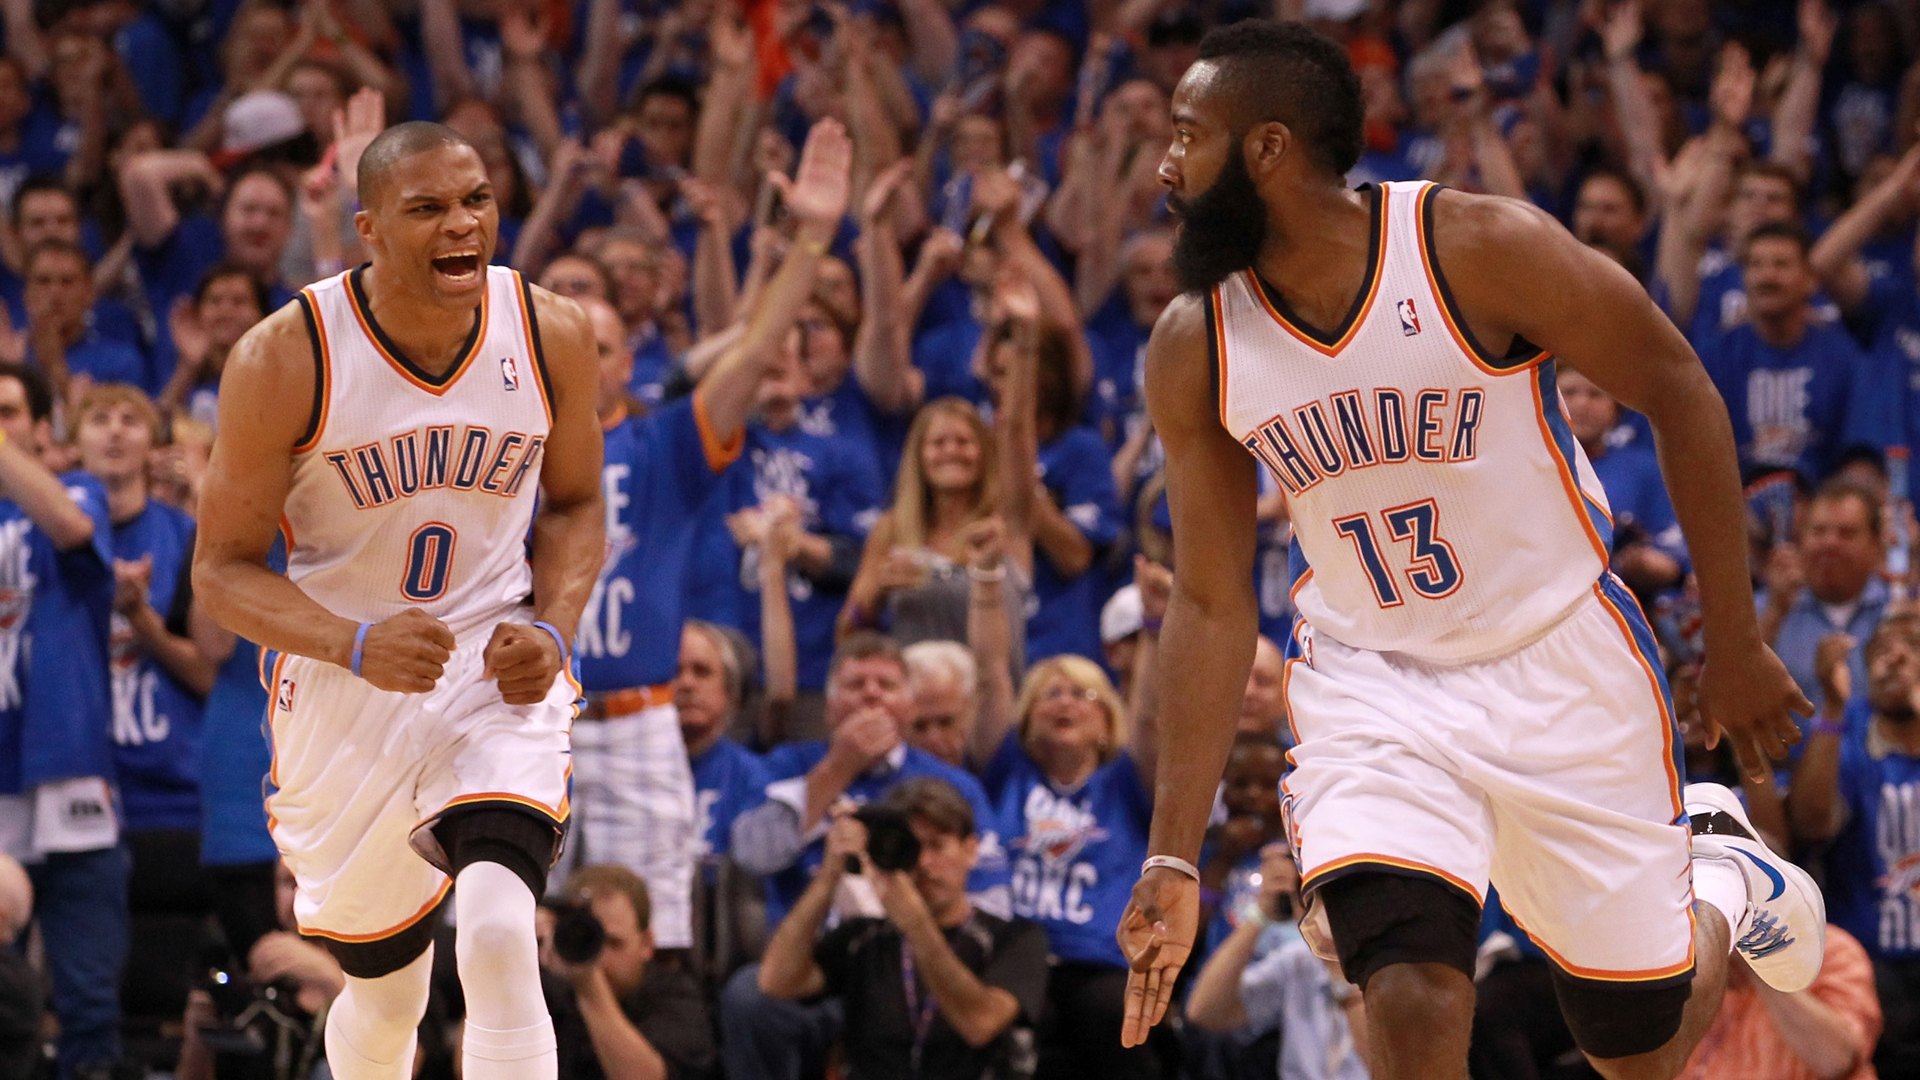 James Harden and Russell Westbrook were part of one of the most promising teams in history until they were not. Now they are back together.